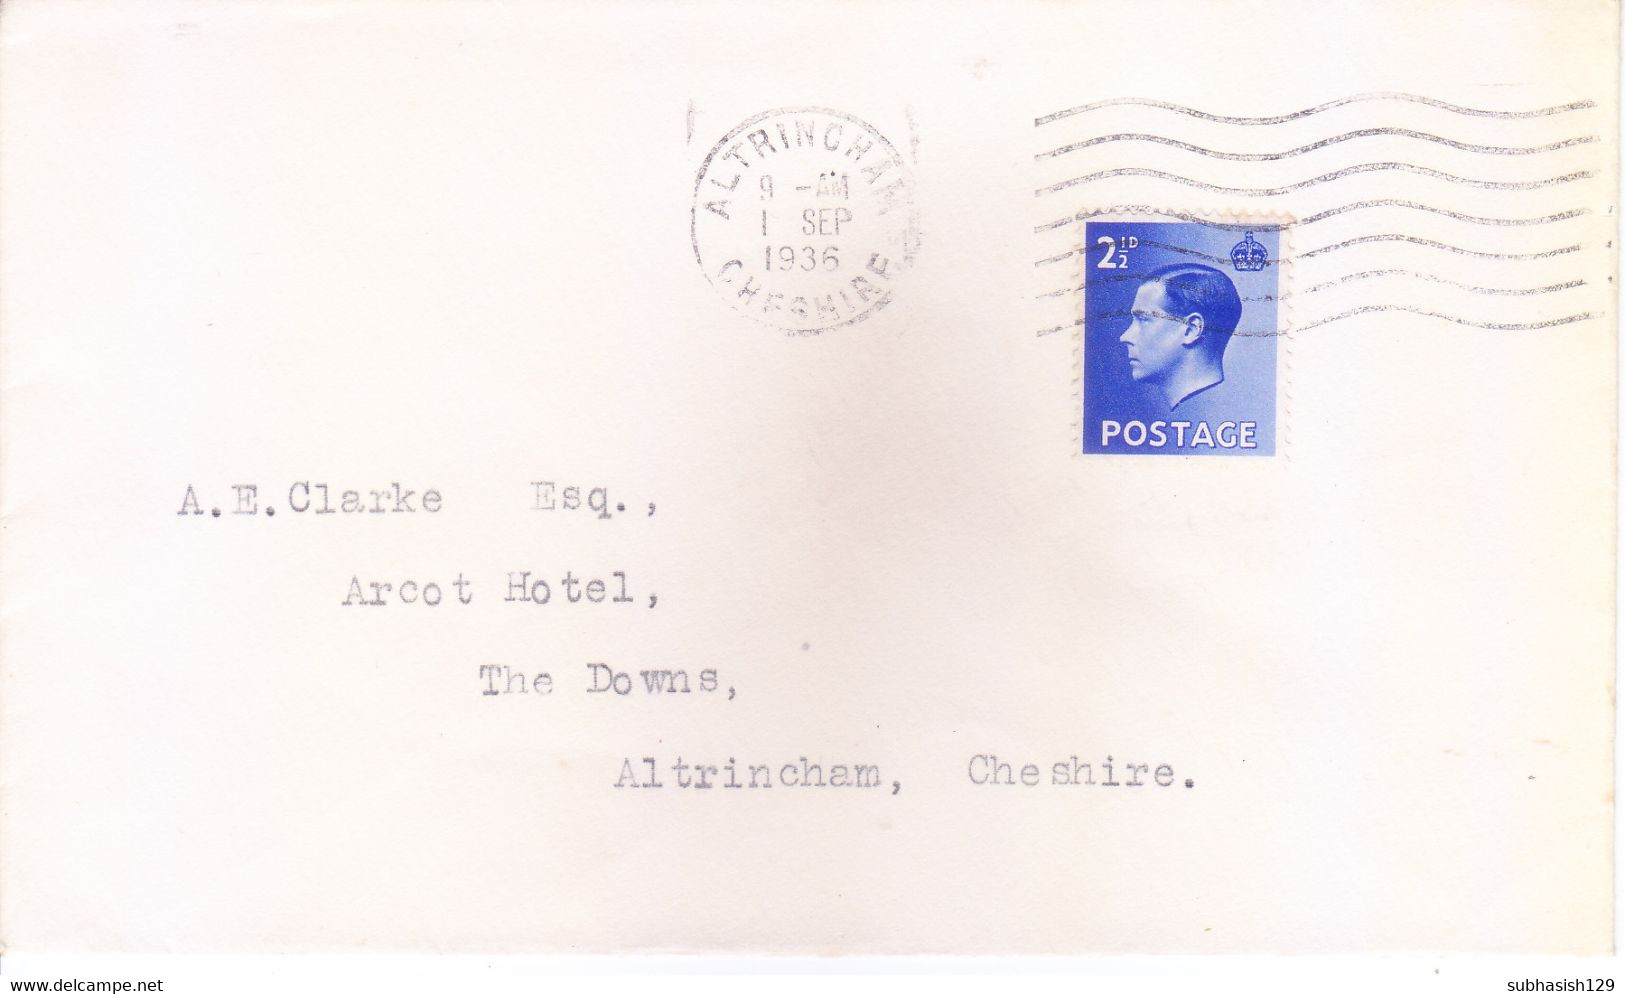 GREAT BRITAIN : FIRST DAY COVER : 01 SEPTEMBER 1936 : 2.5 PENNY BLUE, EDWARD VIII : POSTED FROM ALTRINCHAM - Cartas & Documentos